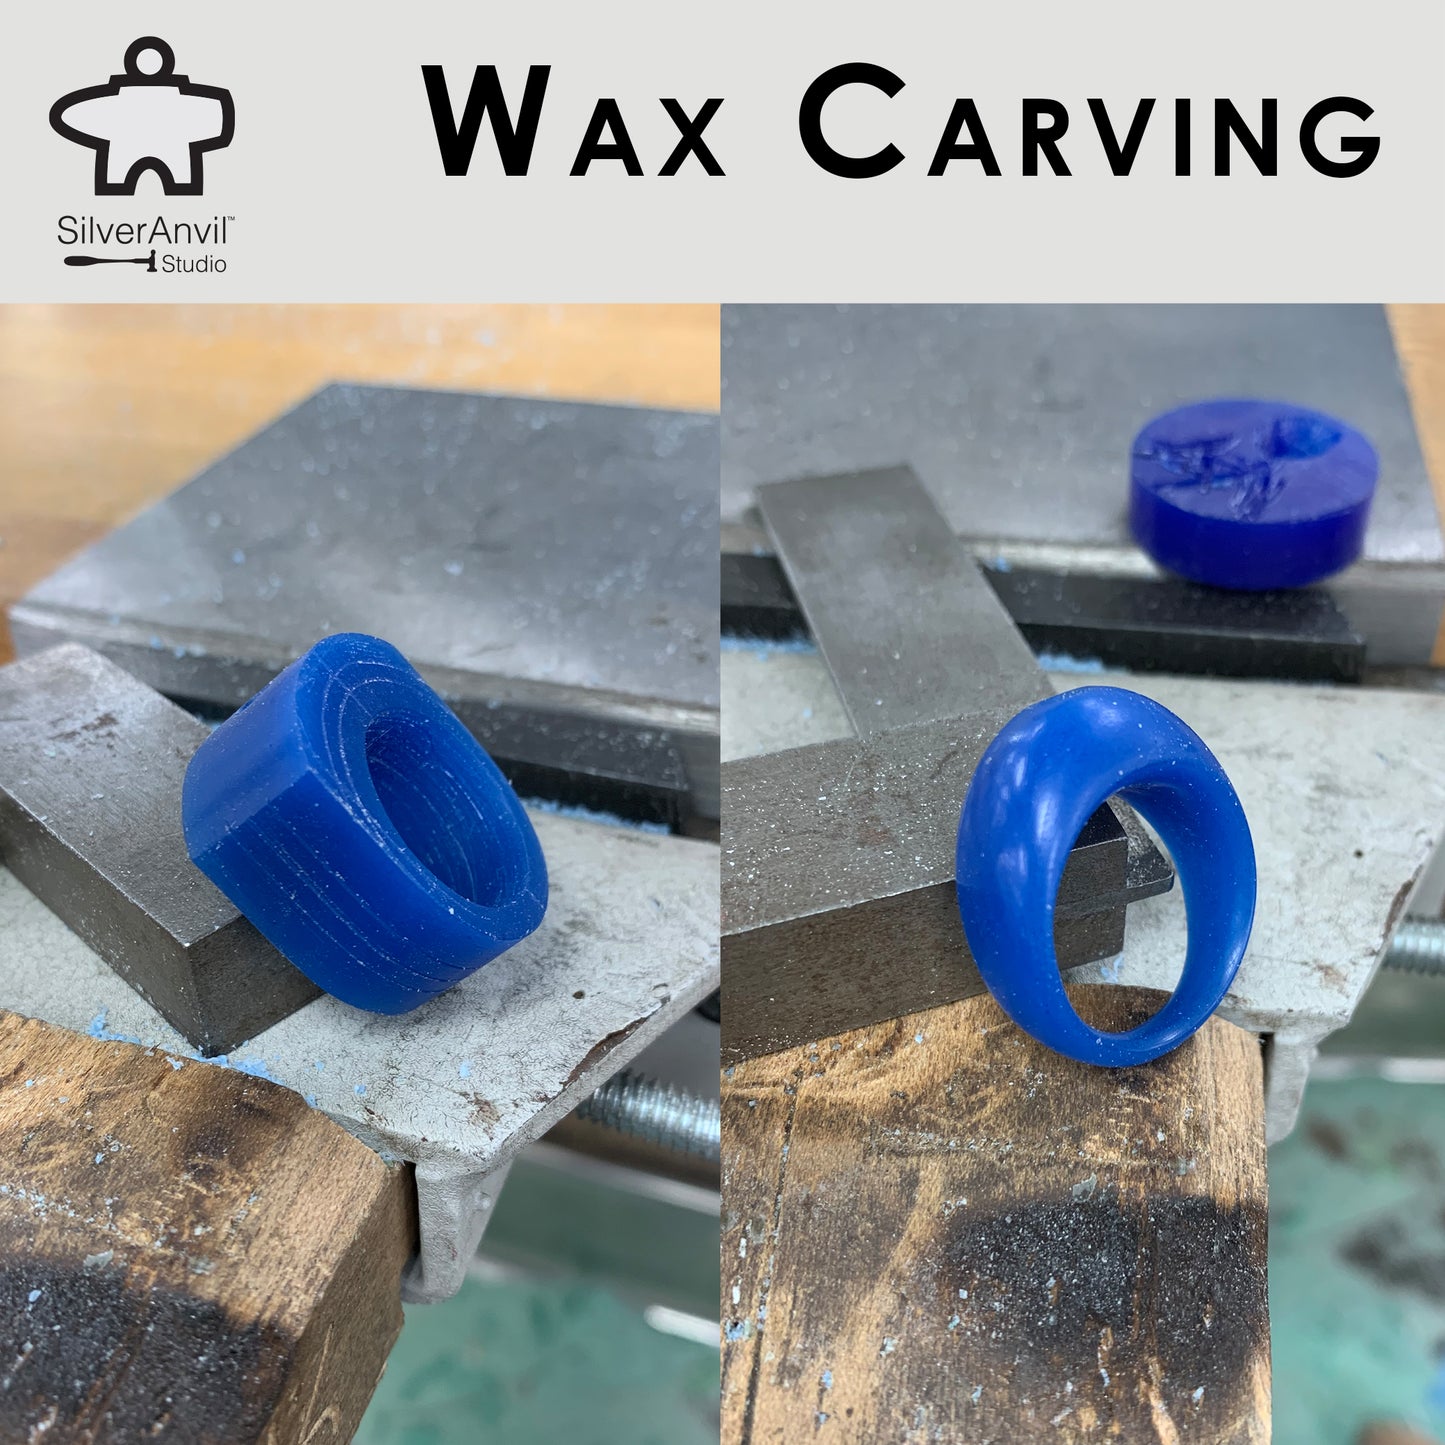 Introduction to Wax Carving